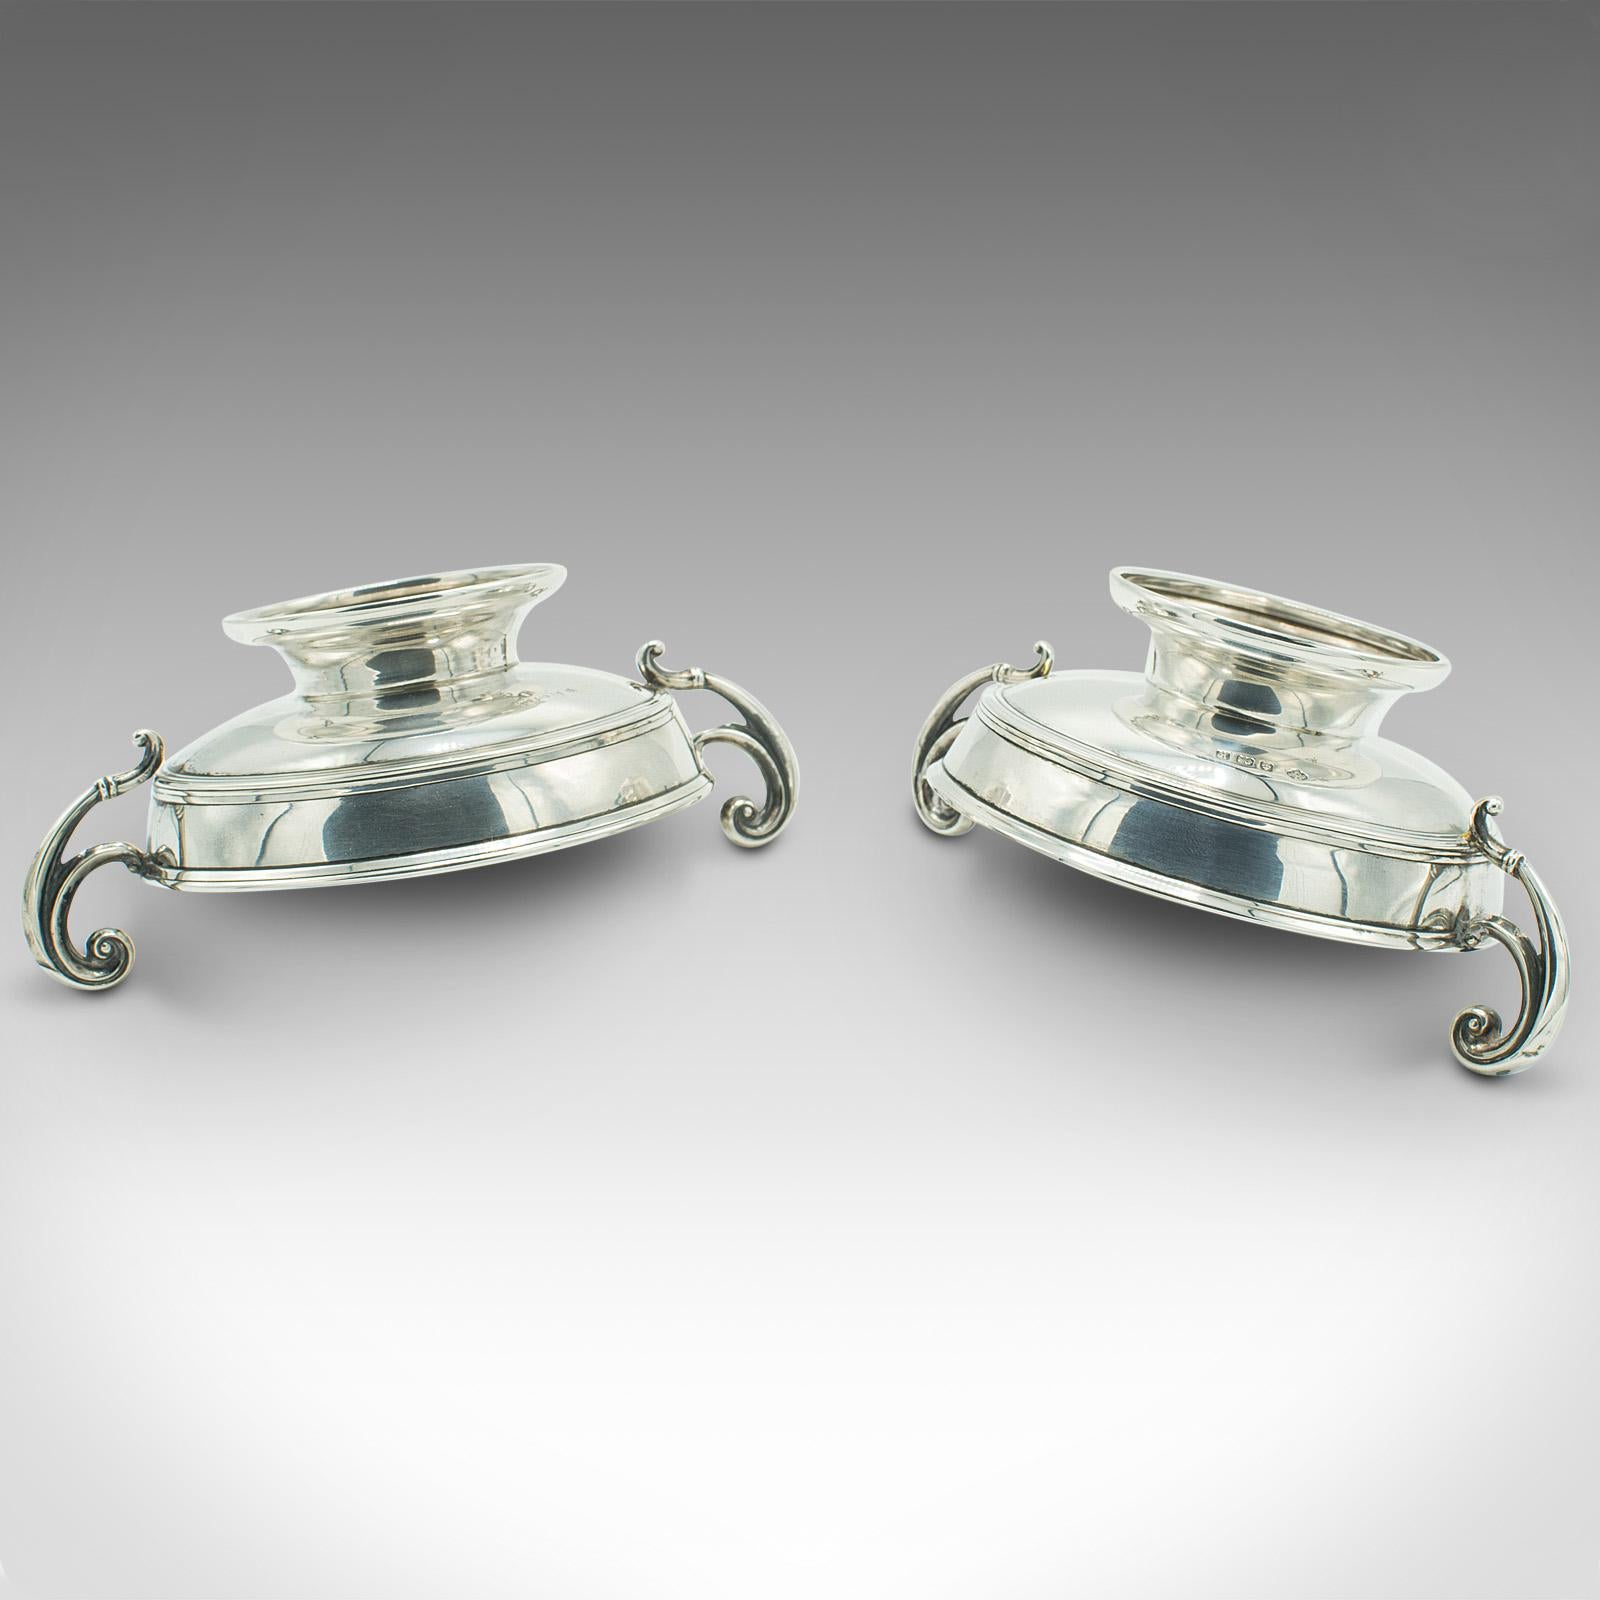 Pair of Antique Bonbon Dishes, English, Sterling Silver, Serving Bowl, Edwardian For Sale 3